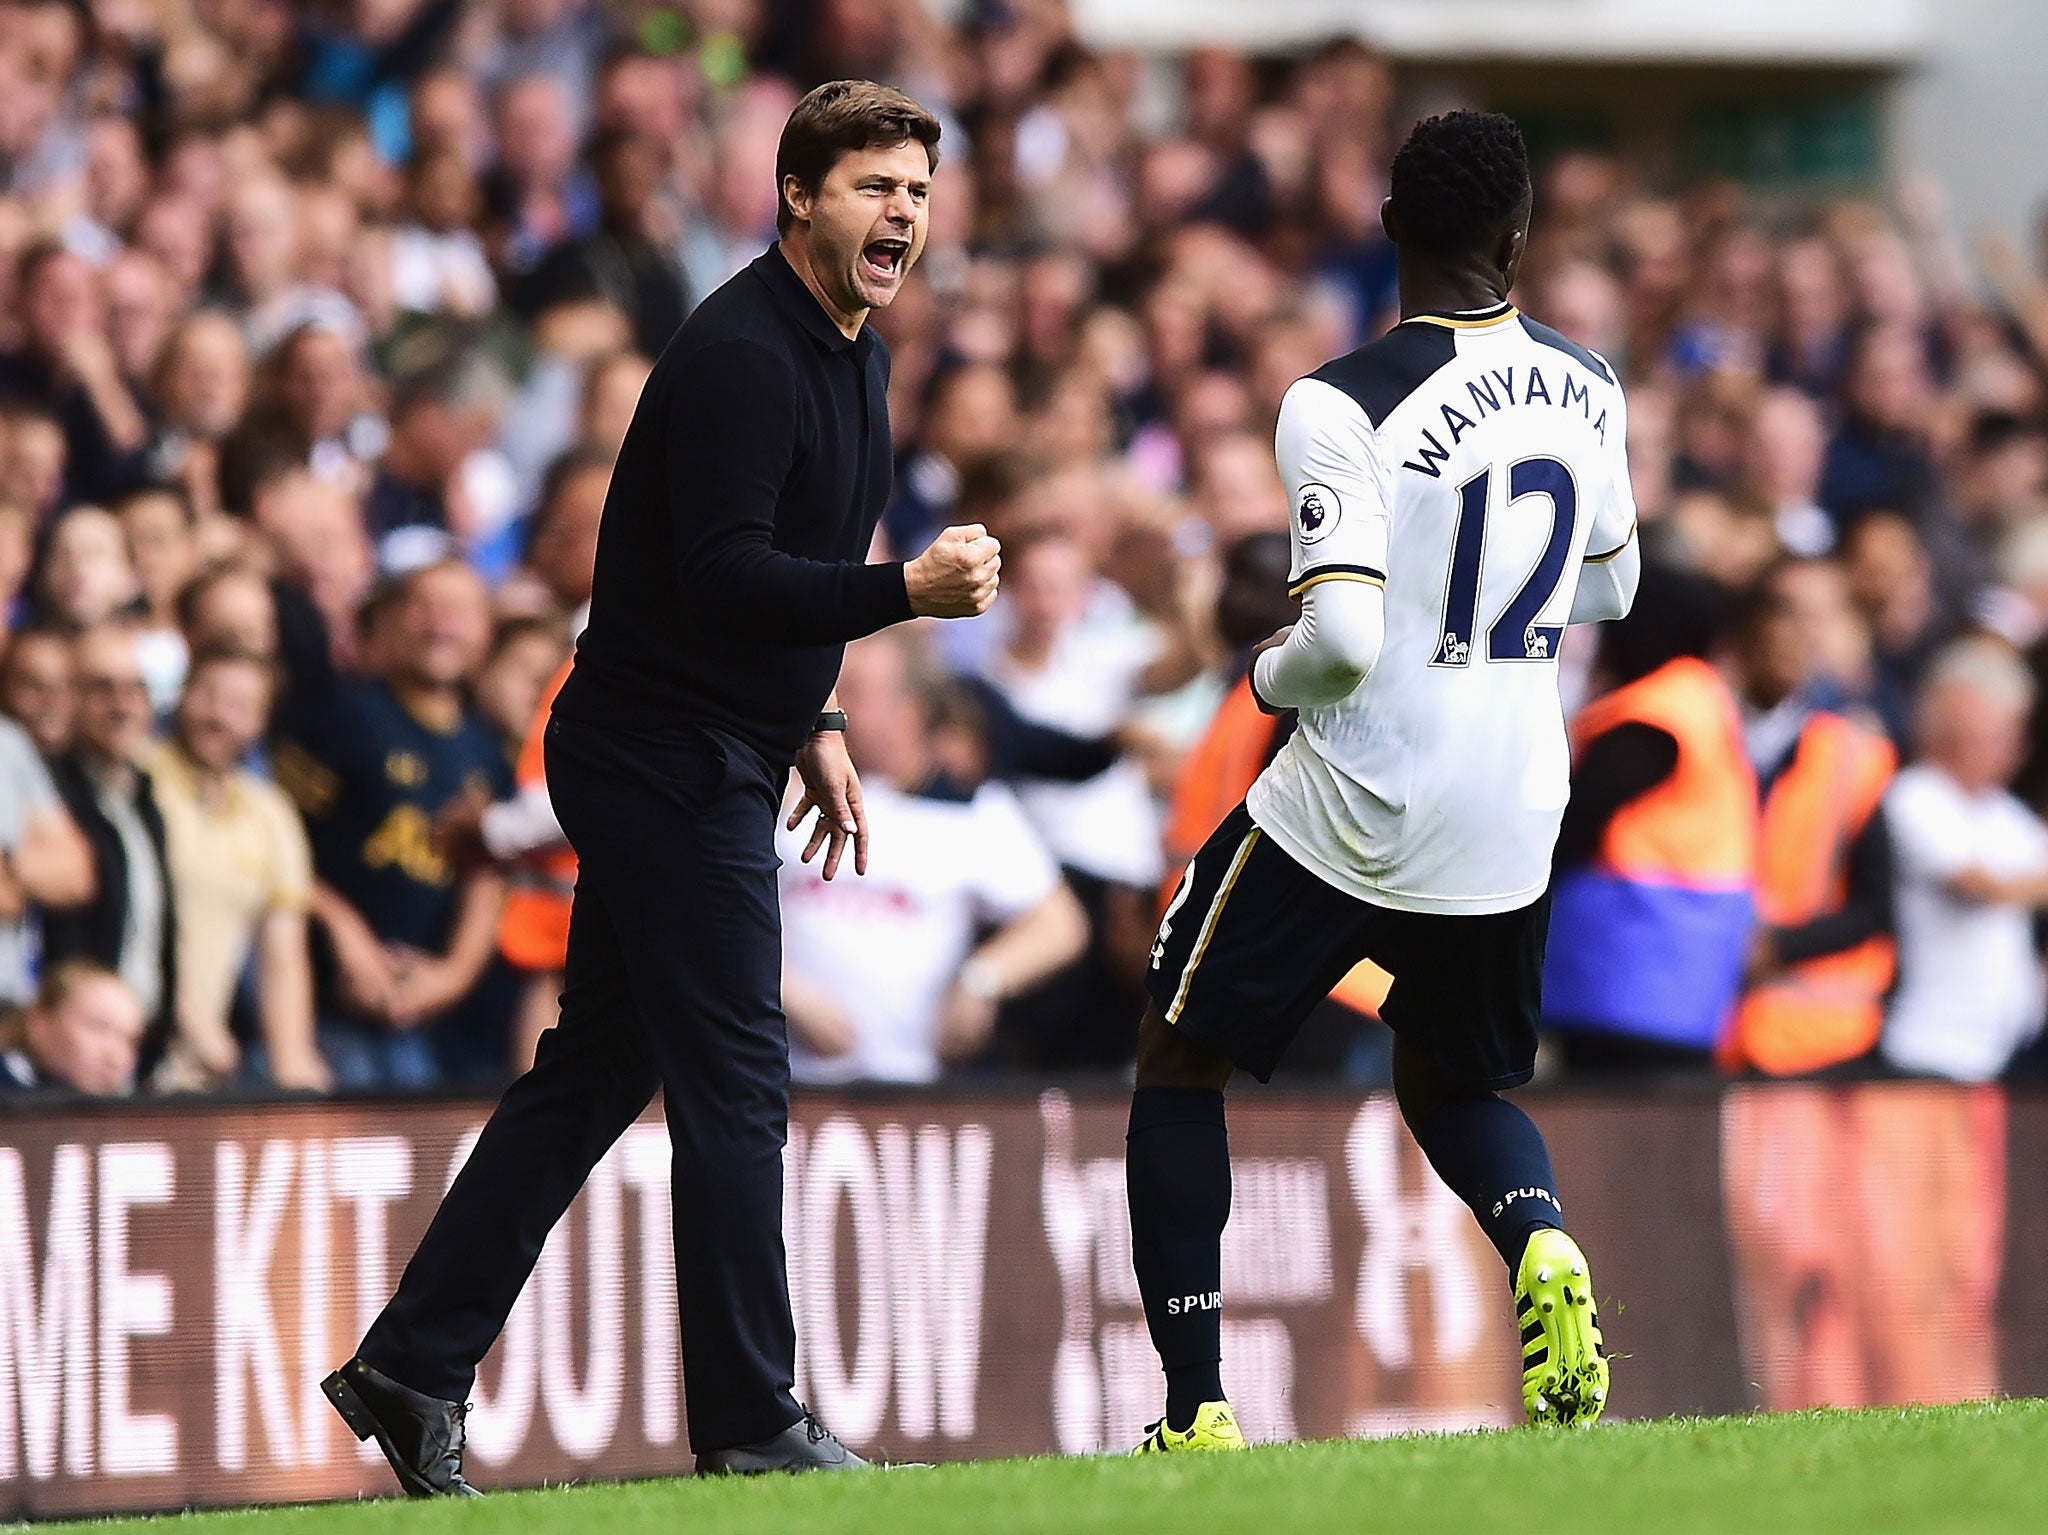 Tottenham will be looking for the second Premier League victory